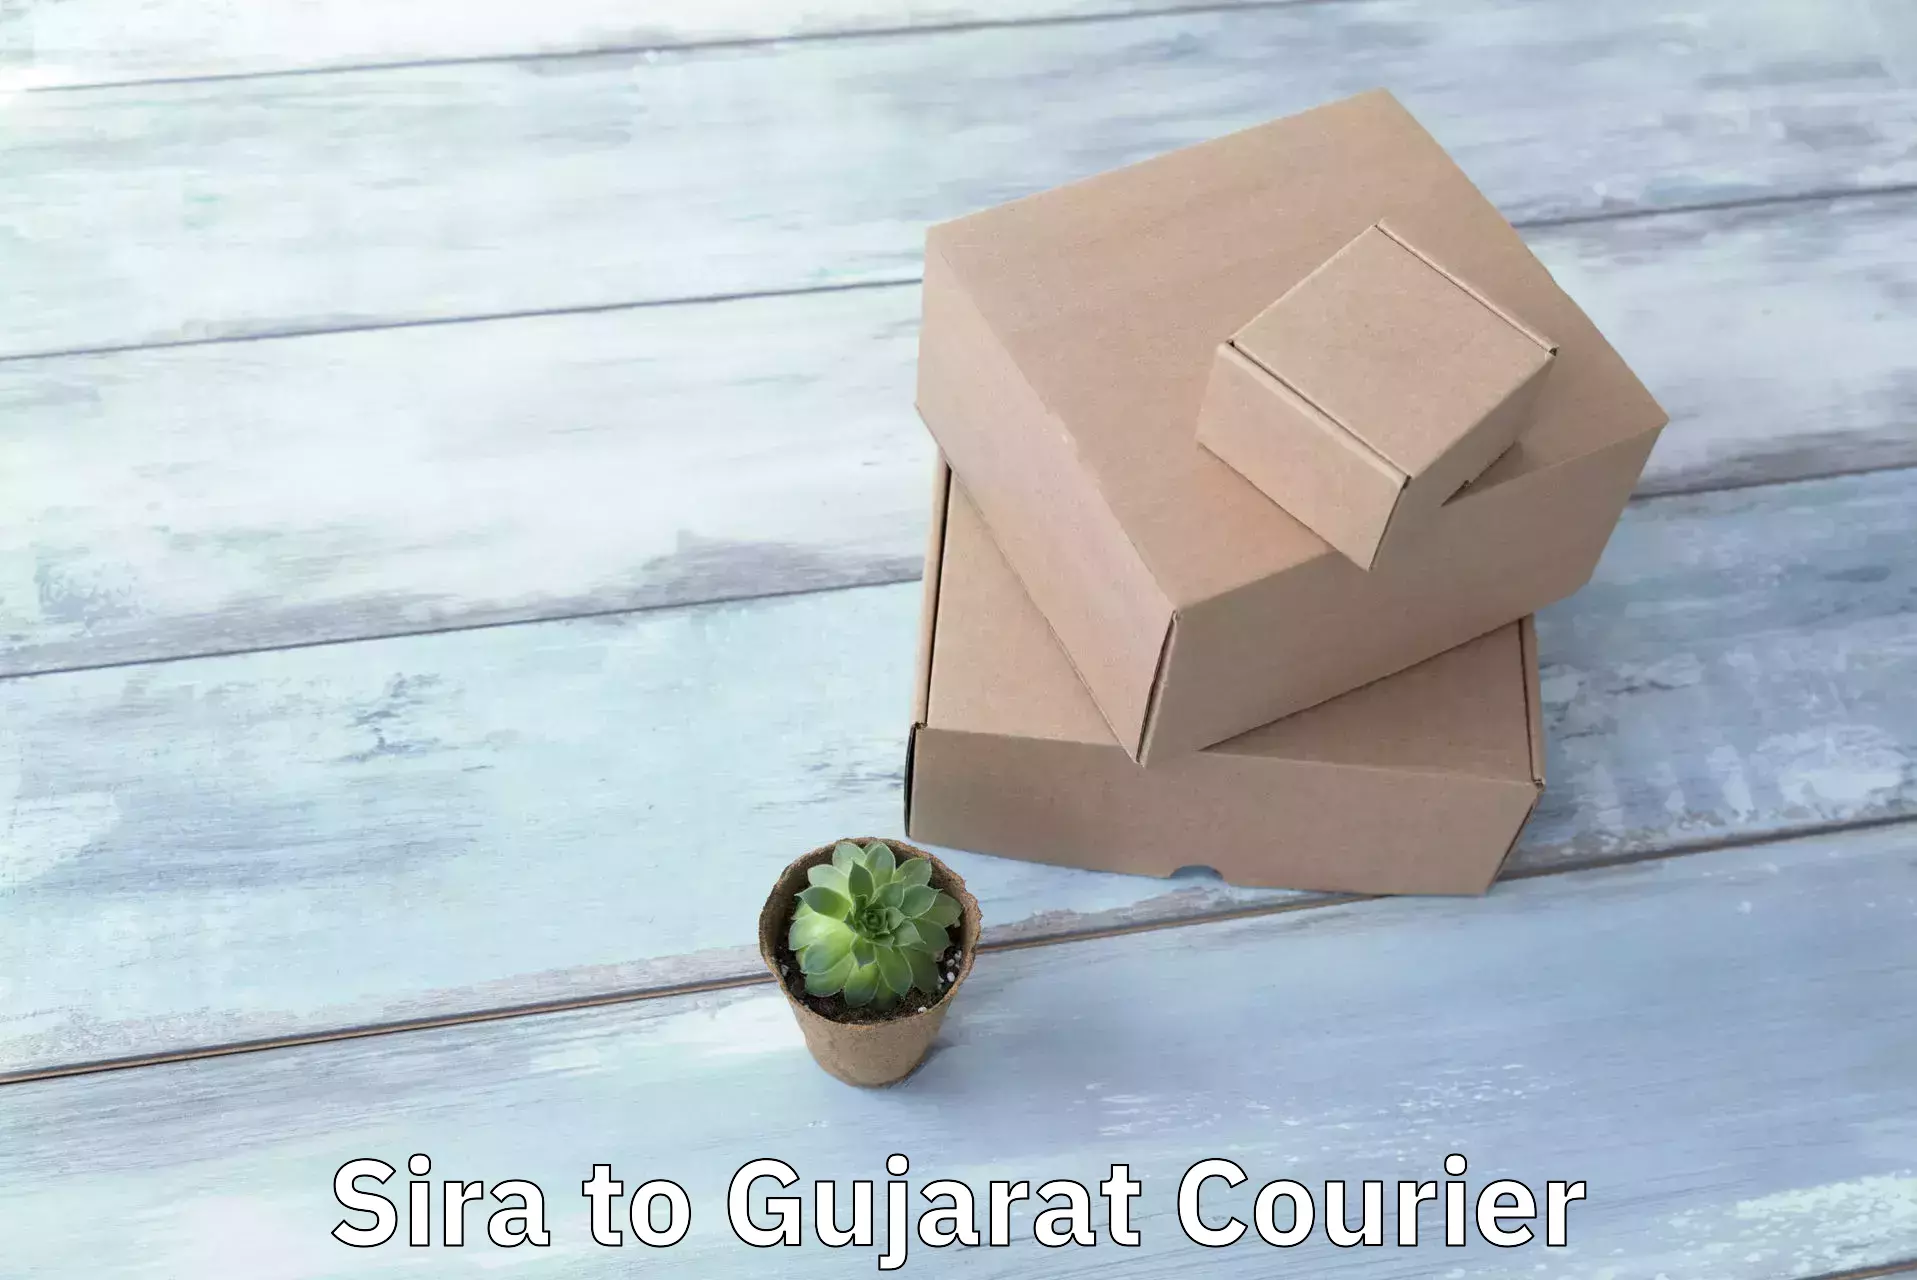 Courier service innovation in Sira to Ahmedabad